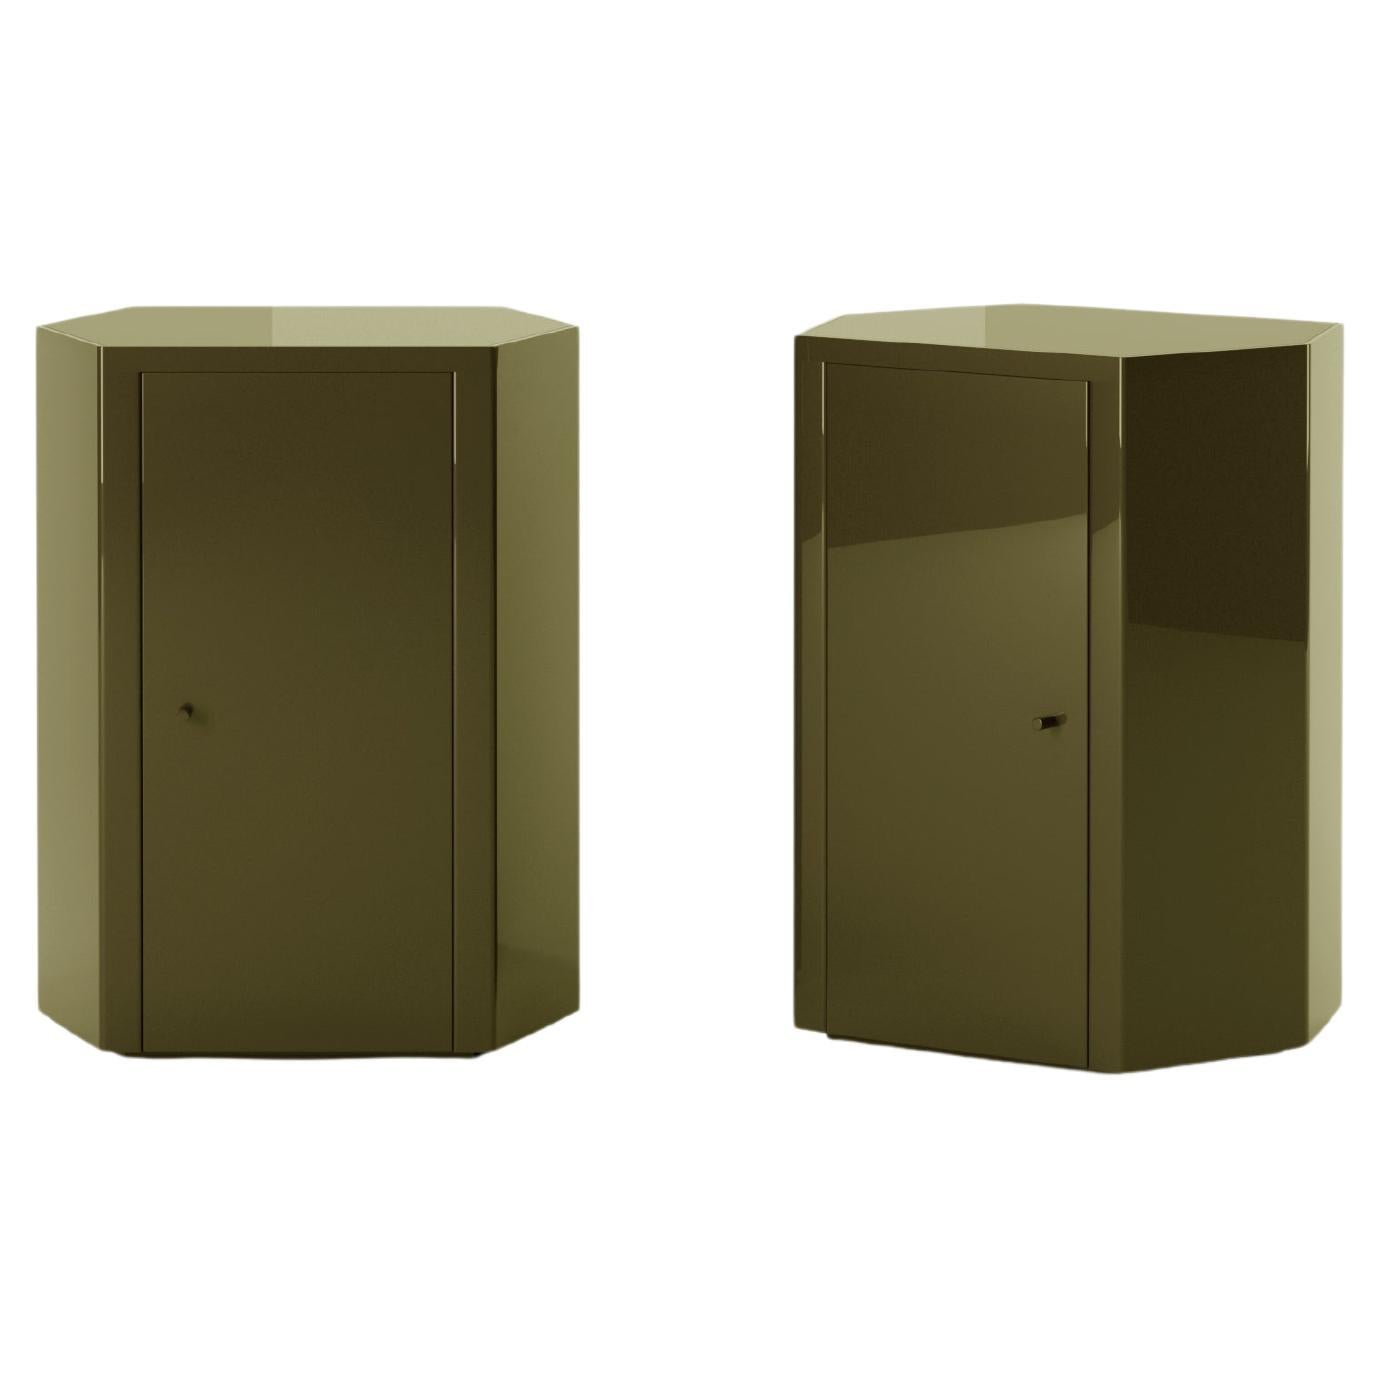 Pair of Park Night Stands in Uniform Olive Green Lacquer by Yaniv Chen for Lemon For Sale